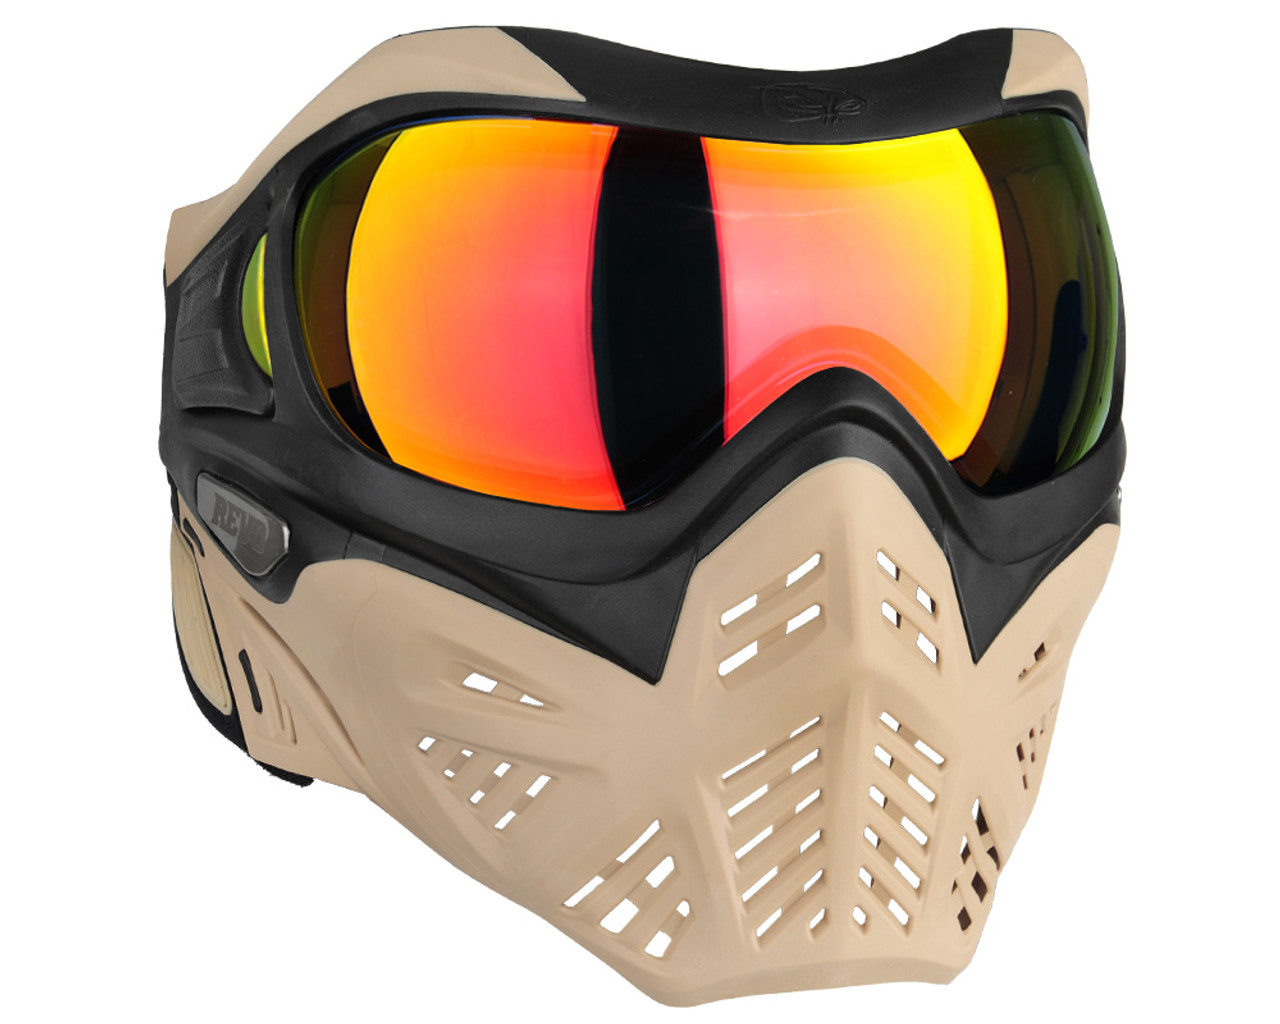 V-Force Grill 2.0 Paintball Mask/Goggle - Revo Tan/Black